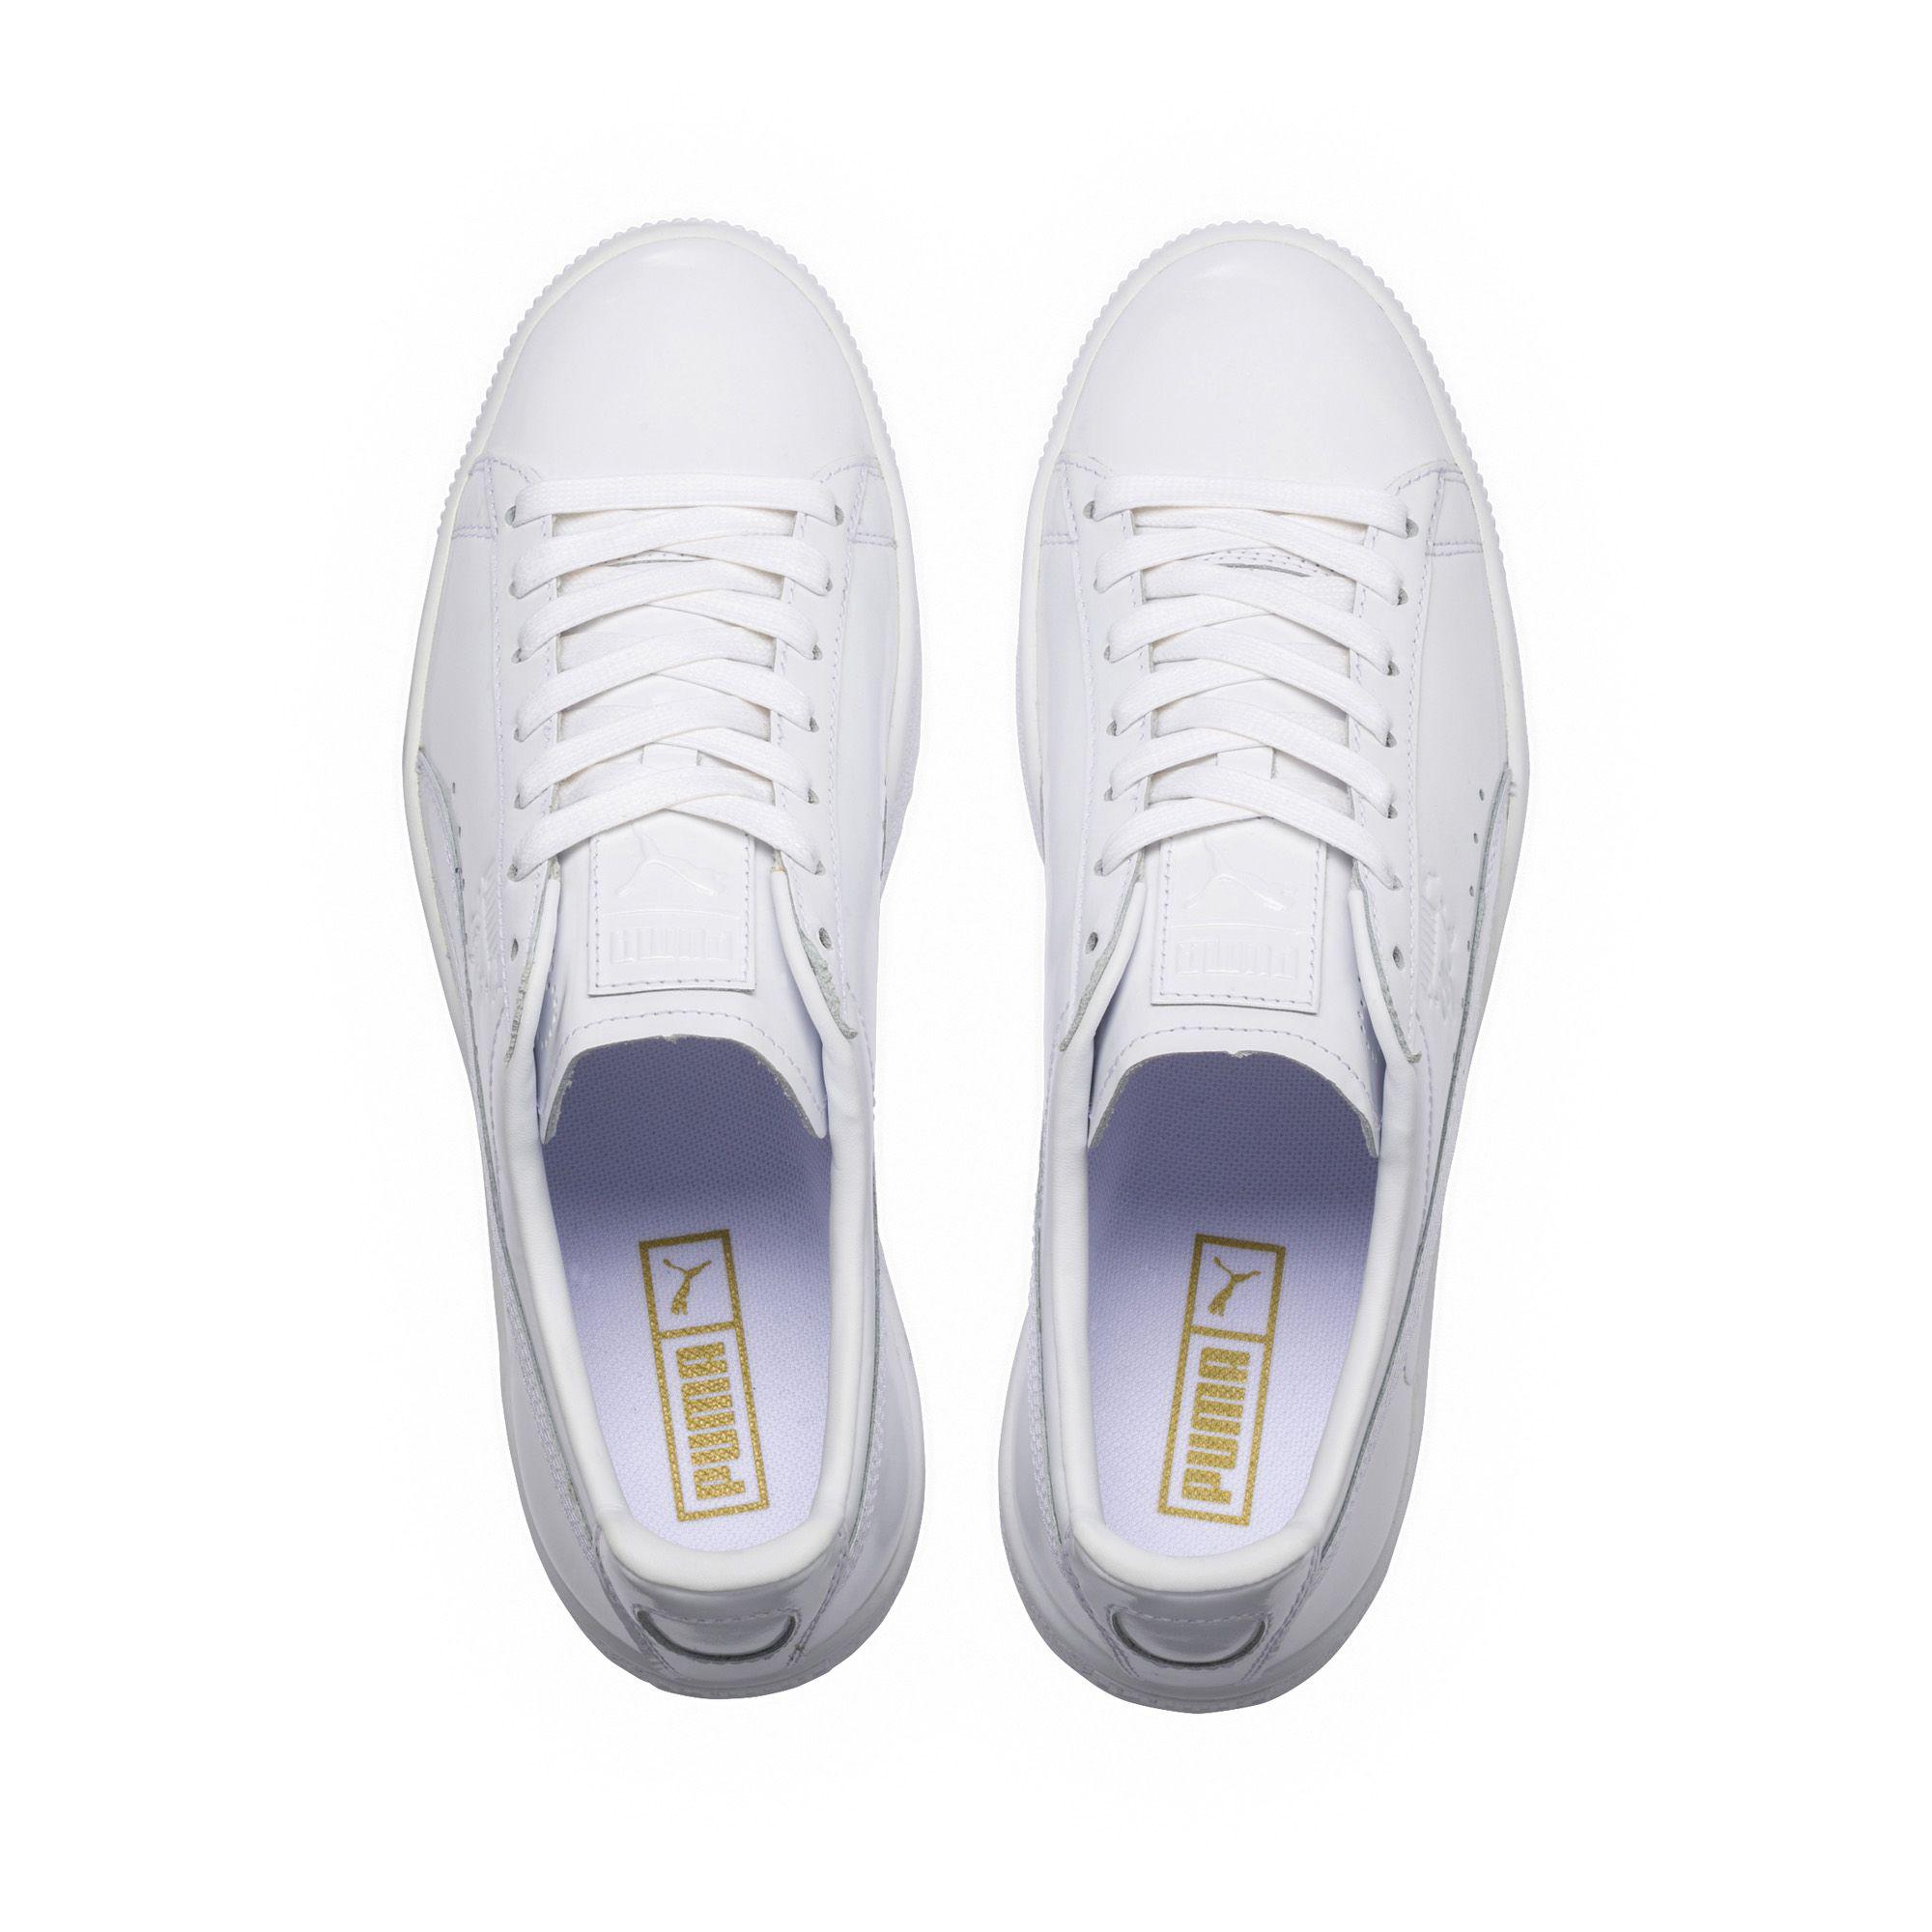 PUMA Suede Clyde Dressed Part Three Sneakers in White - Lyst